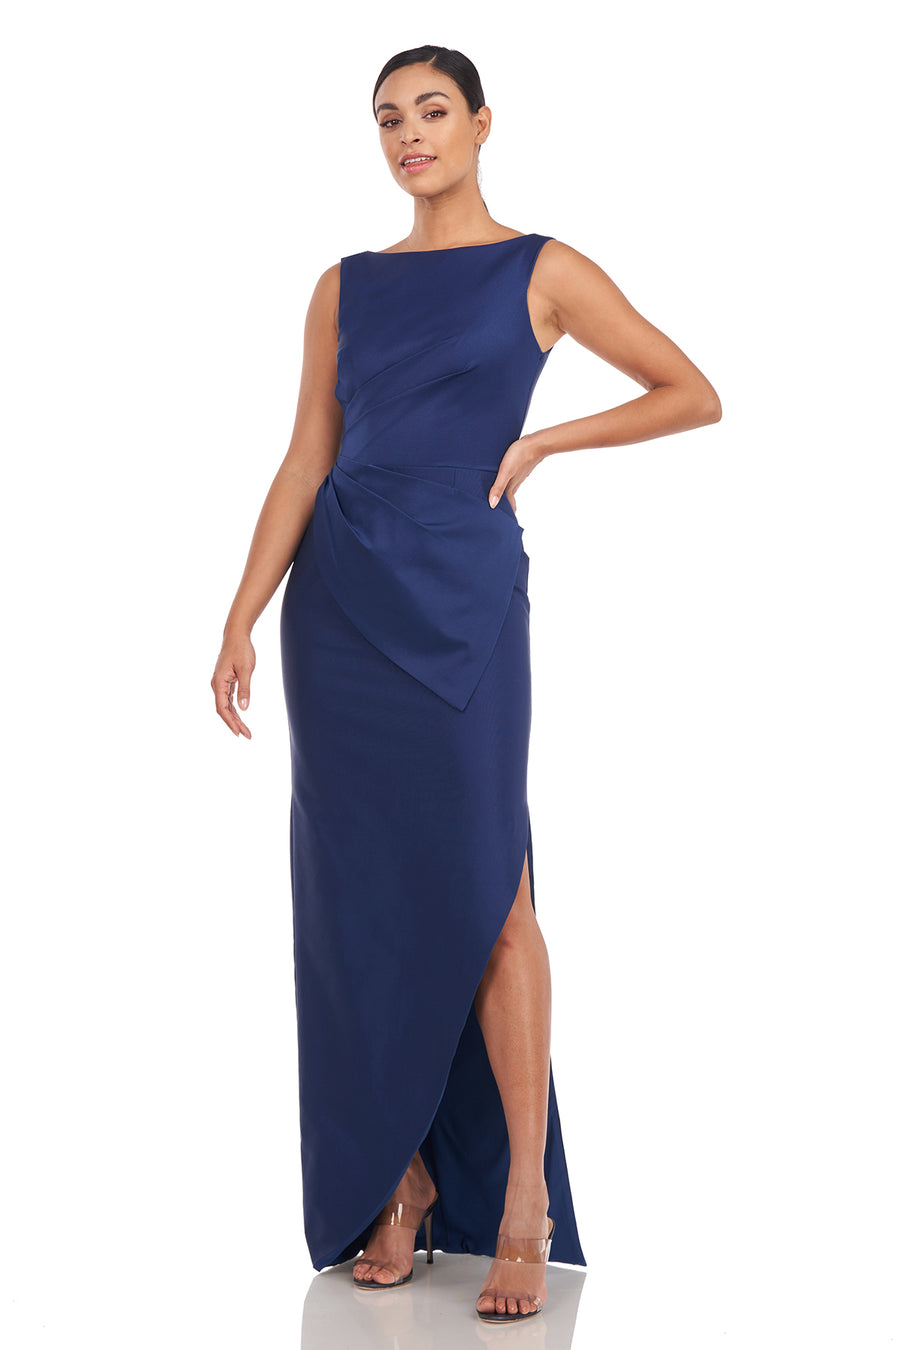 KAY UNGER heather gown - blue